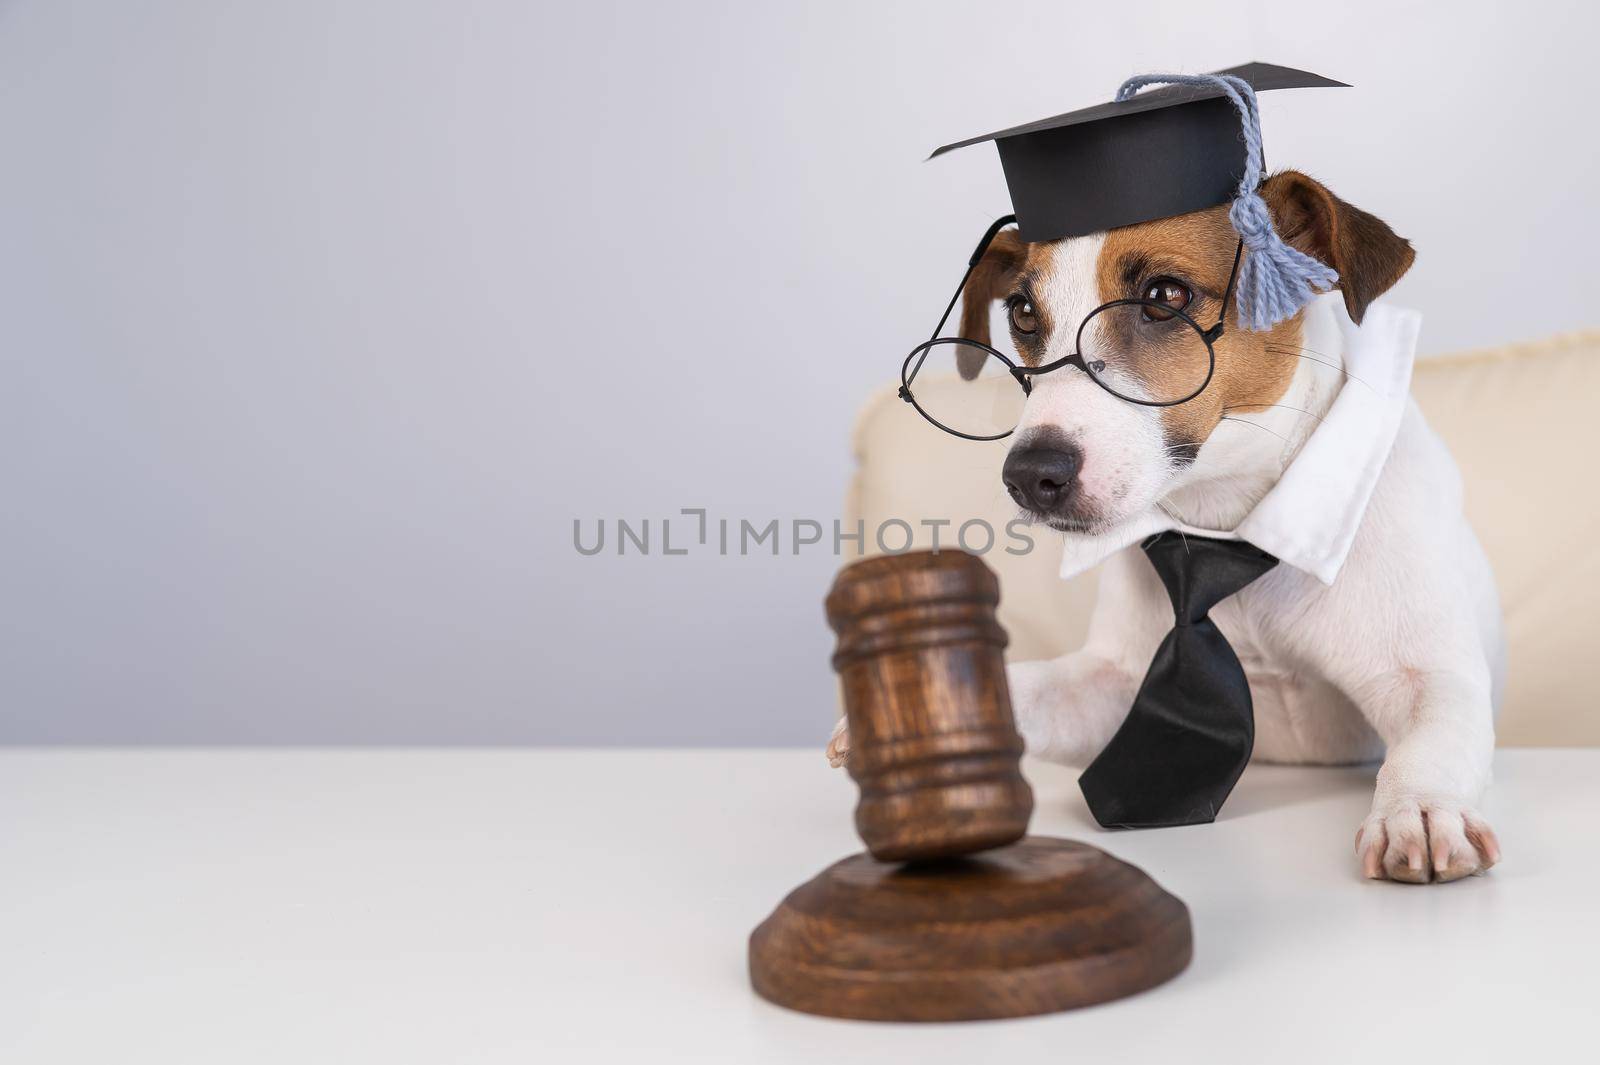 Dog jack russell terrier in a suit of a judge and with a gavel on a white background. by mrwed54